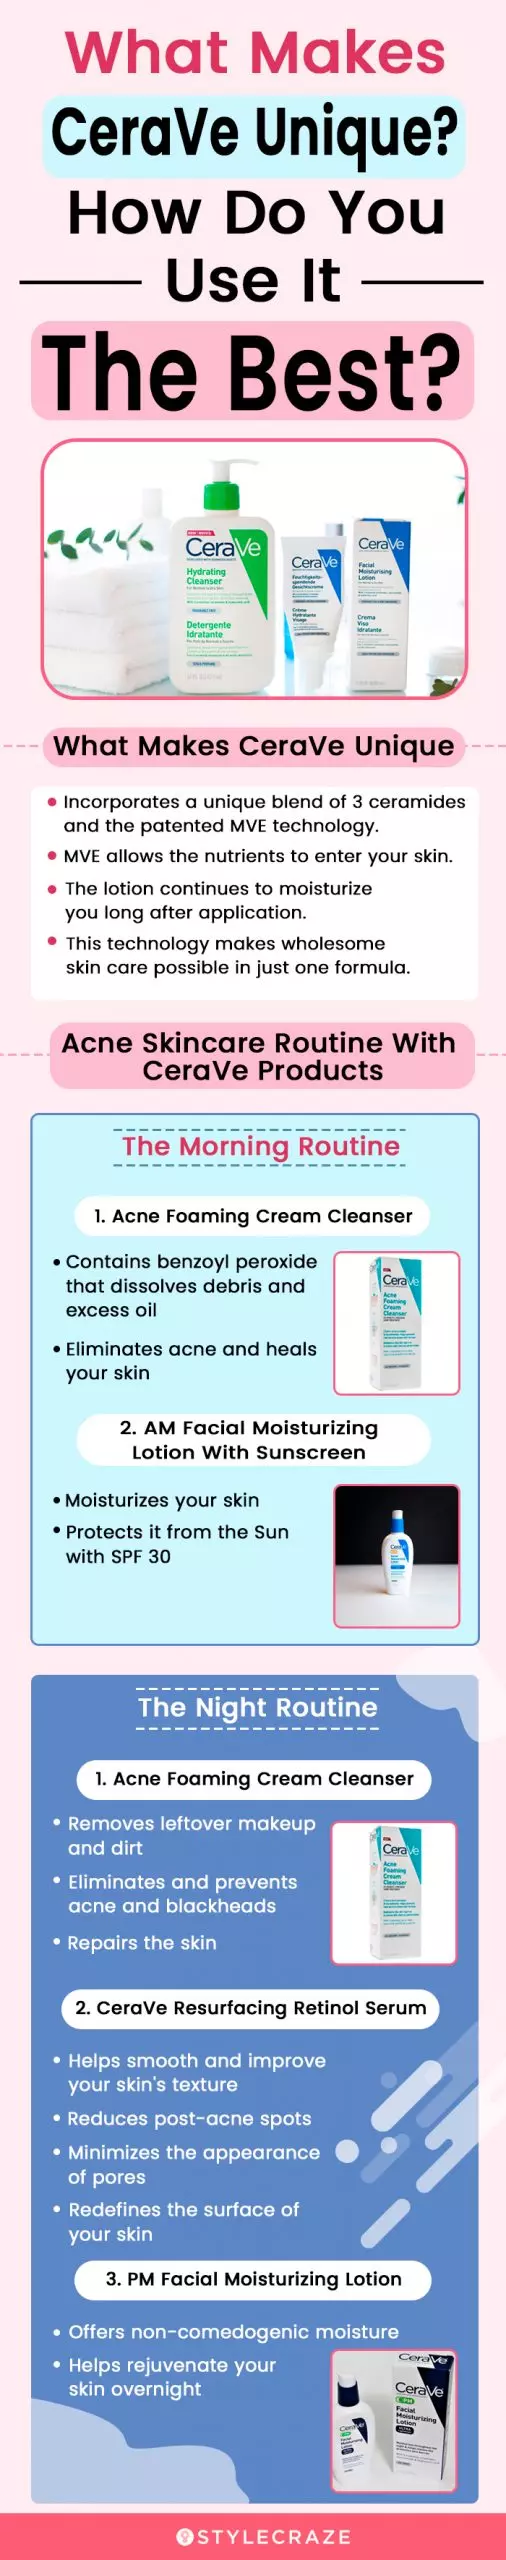 What Makes CeraVe Unique and How to Use It (infographic)